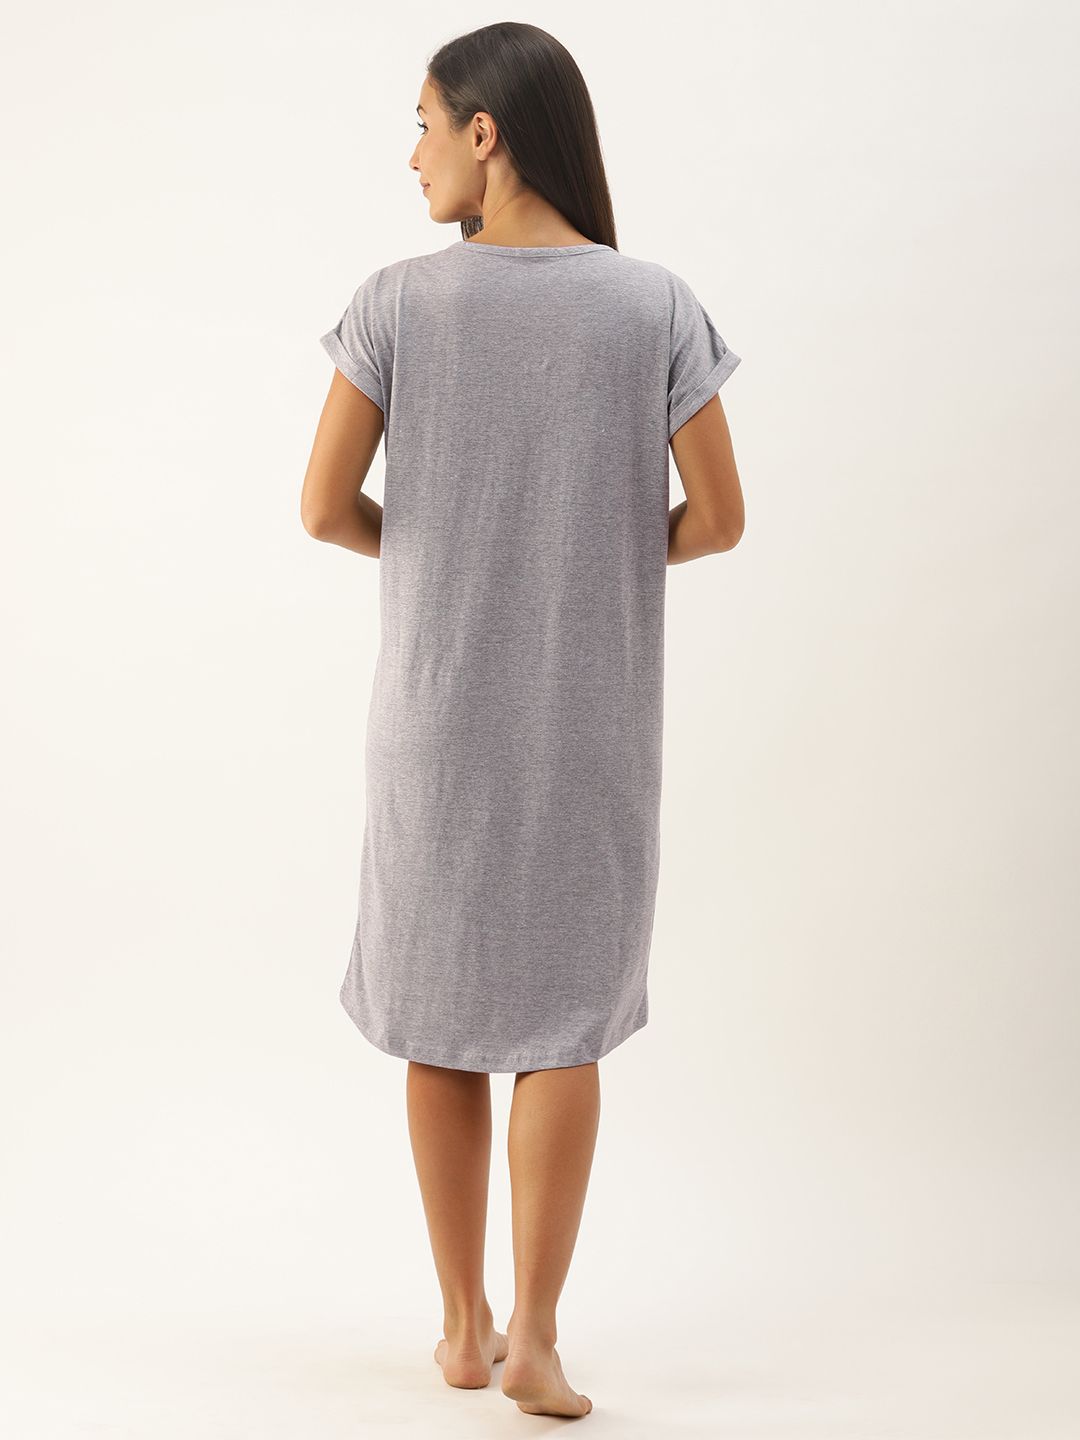 Loose Fit "We are Heart" Sleep Shirt - Colour Grey Mel.